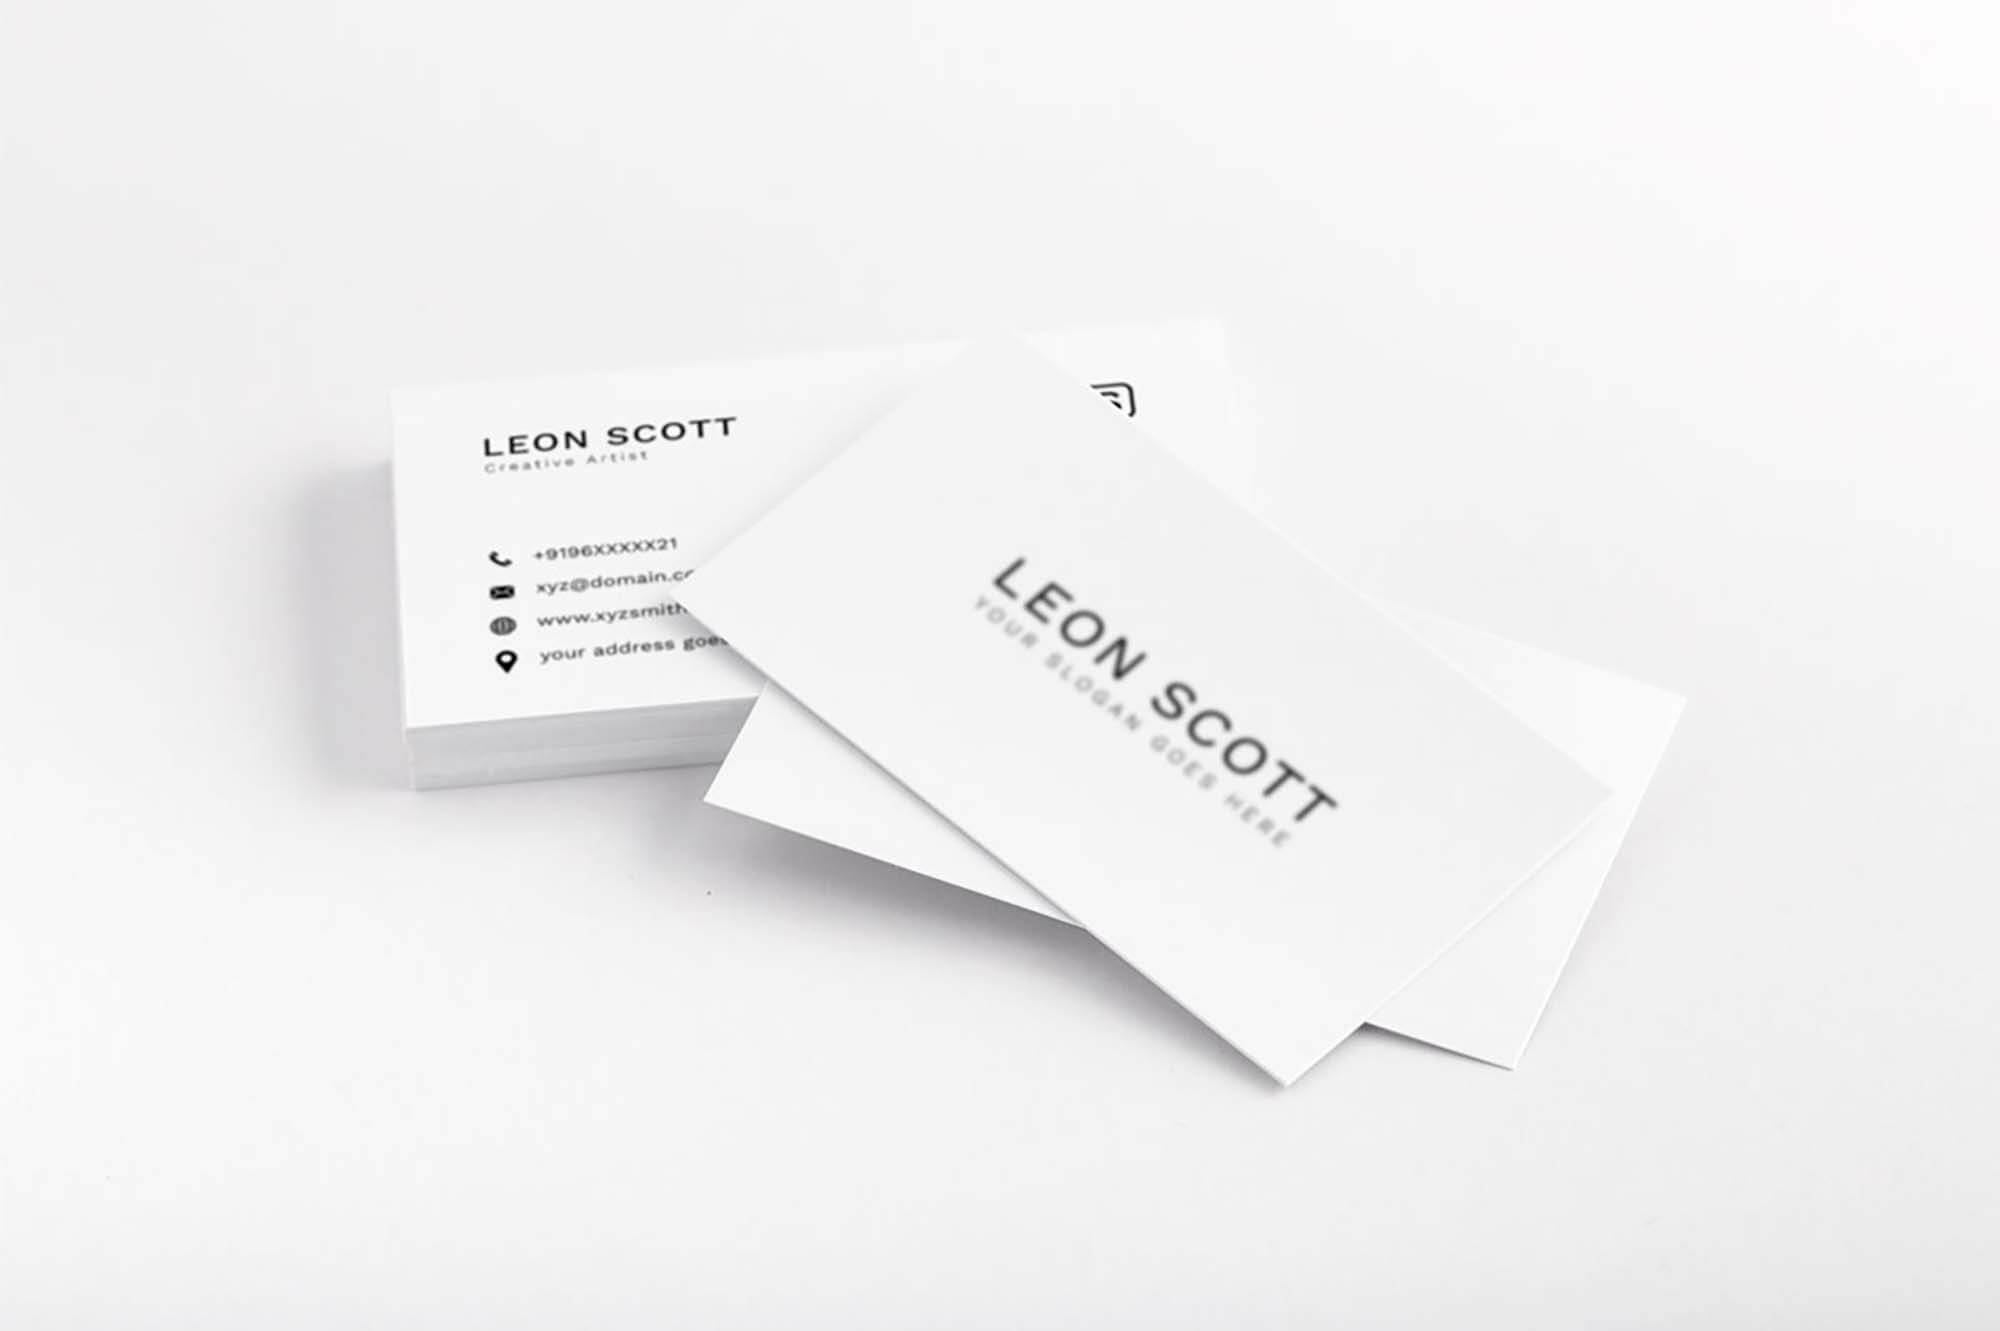 018 Business Card Template Psd Blank Download Visiting With Regard To Business Card Size Template Psd